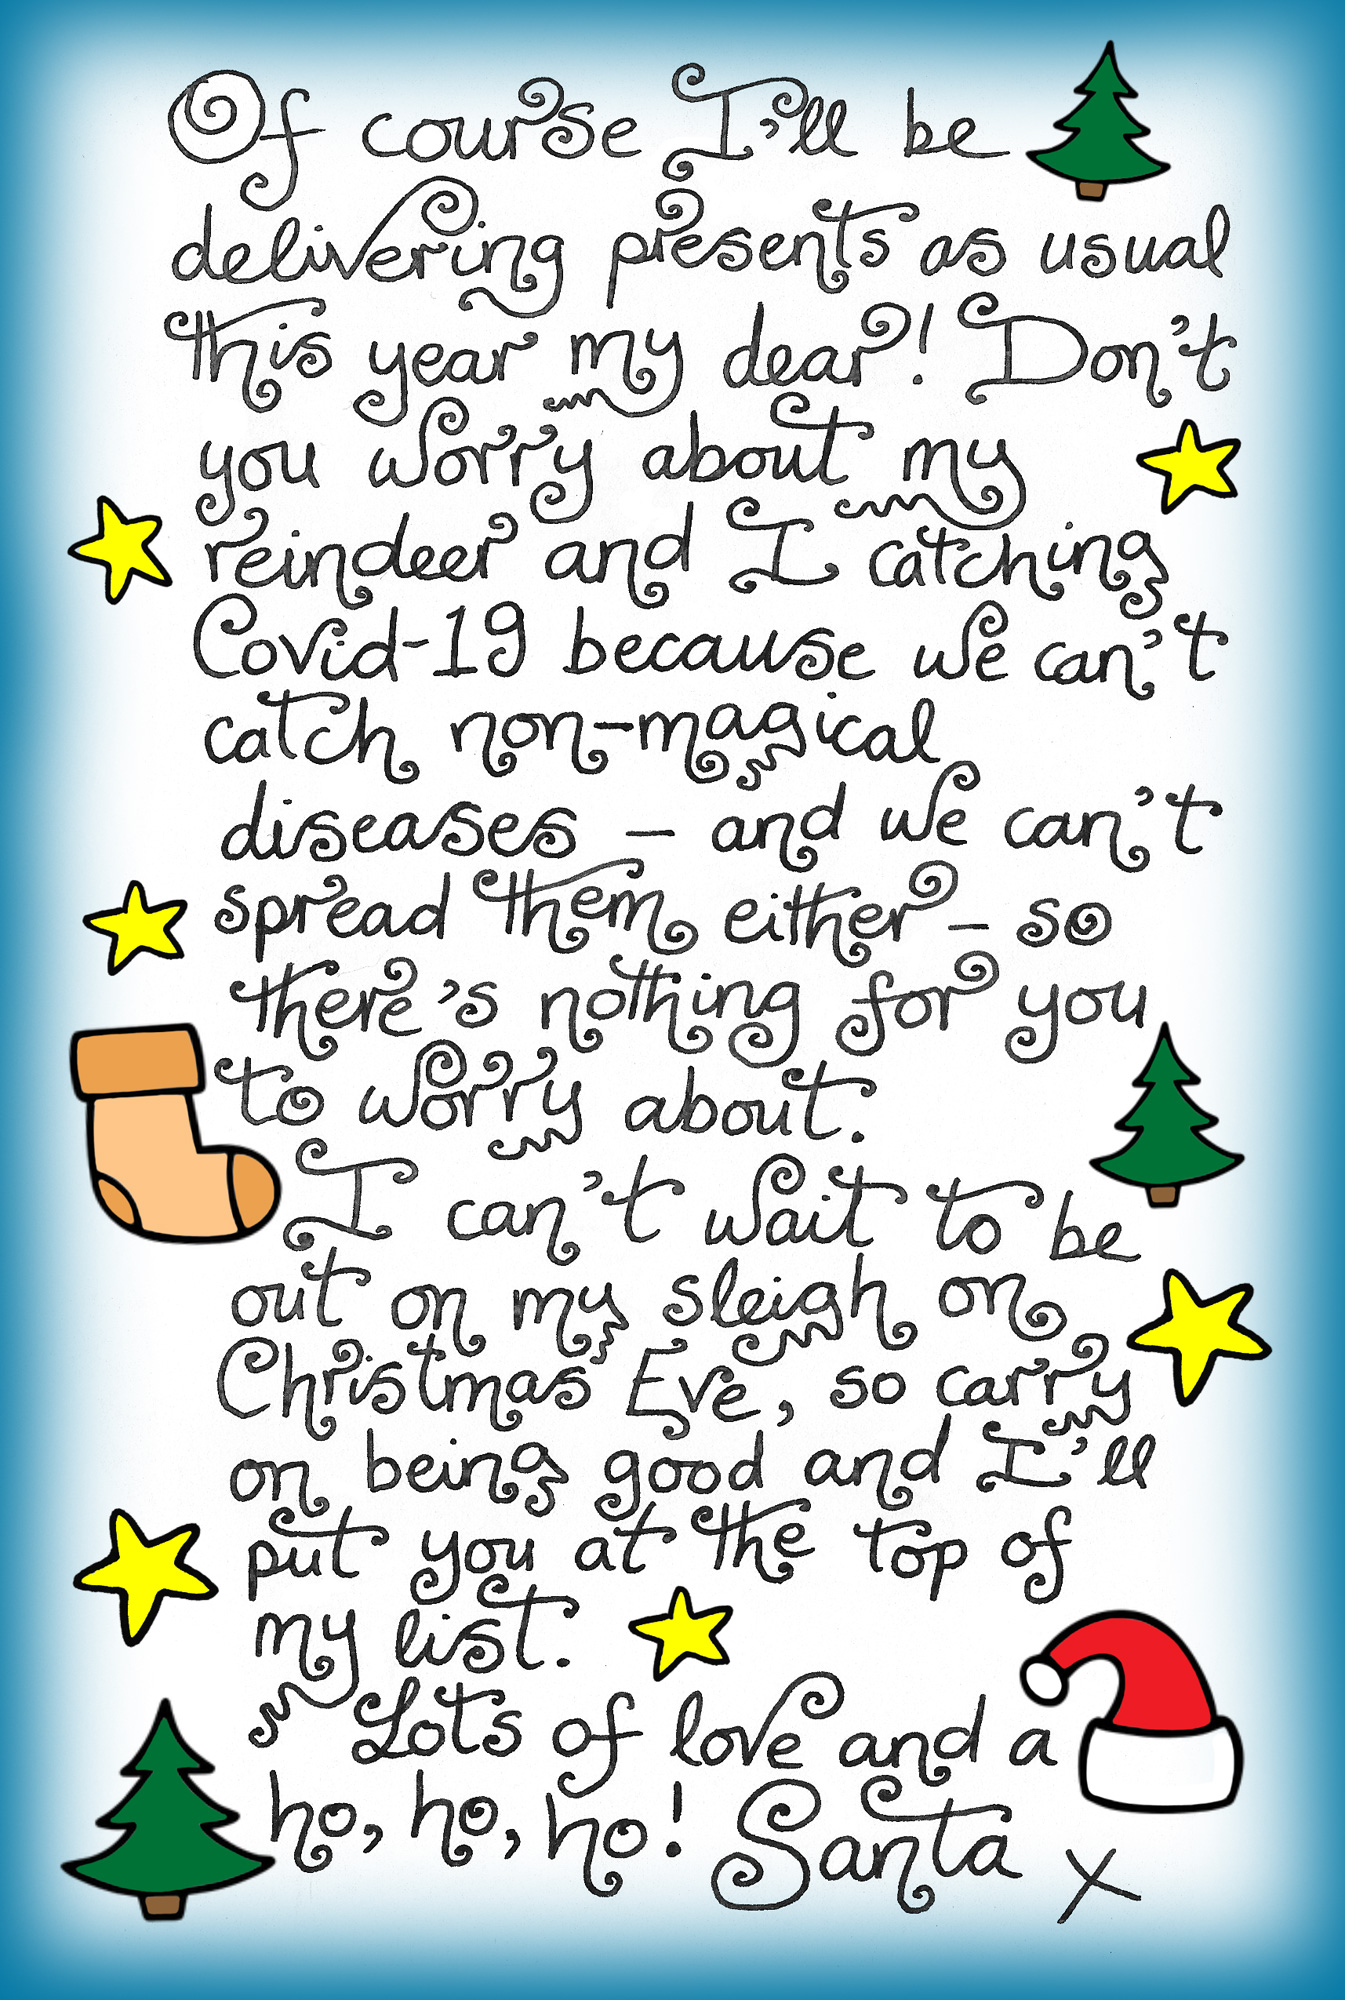 A note from Santa saying that he will still be delivering presents this Christmas, in spite of the coronavirus.